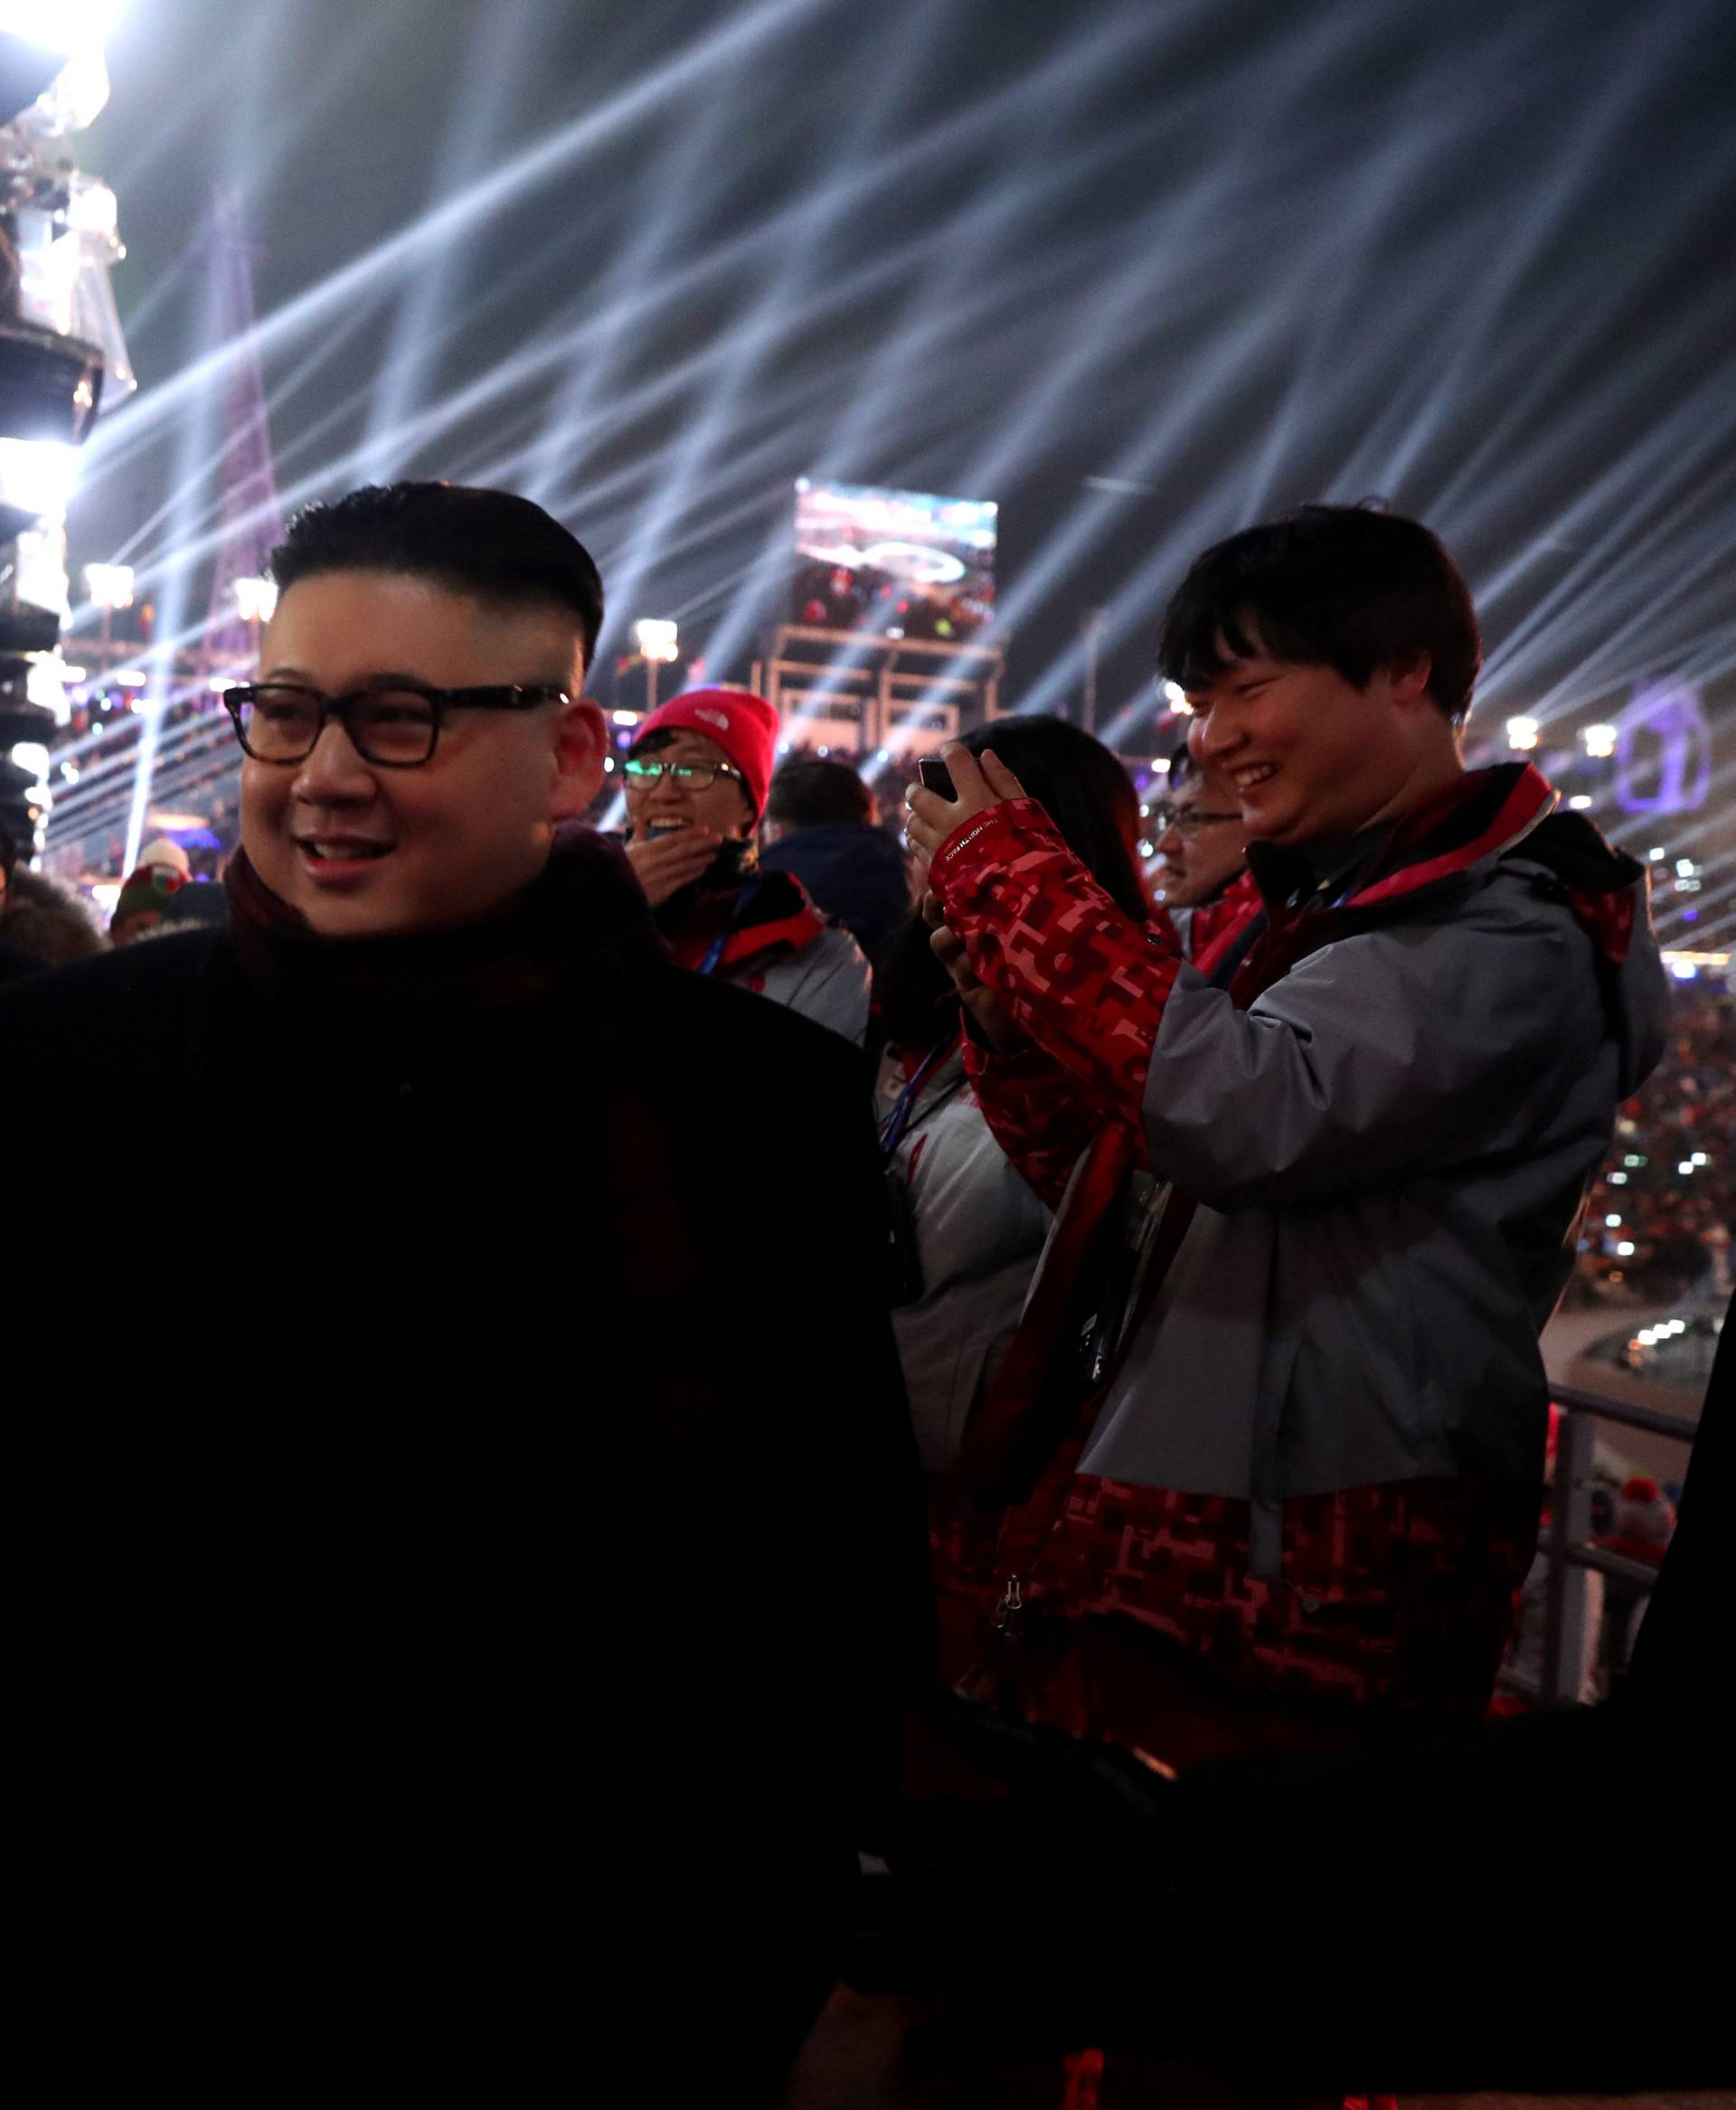 People dressed-up as U.S. President Donald Trump and North Korean leader Kim Jong Un attend the Winter Olympics opening ceremony in Pyeongchang